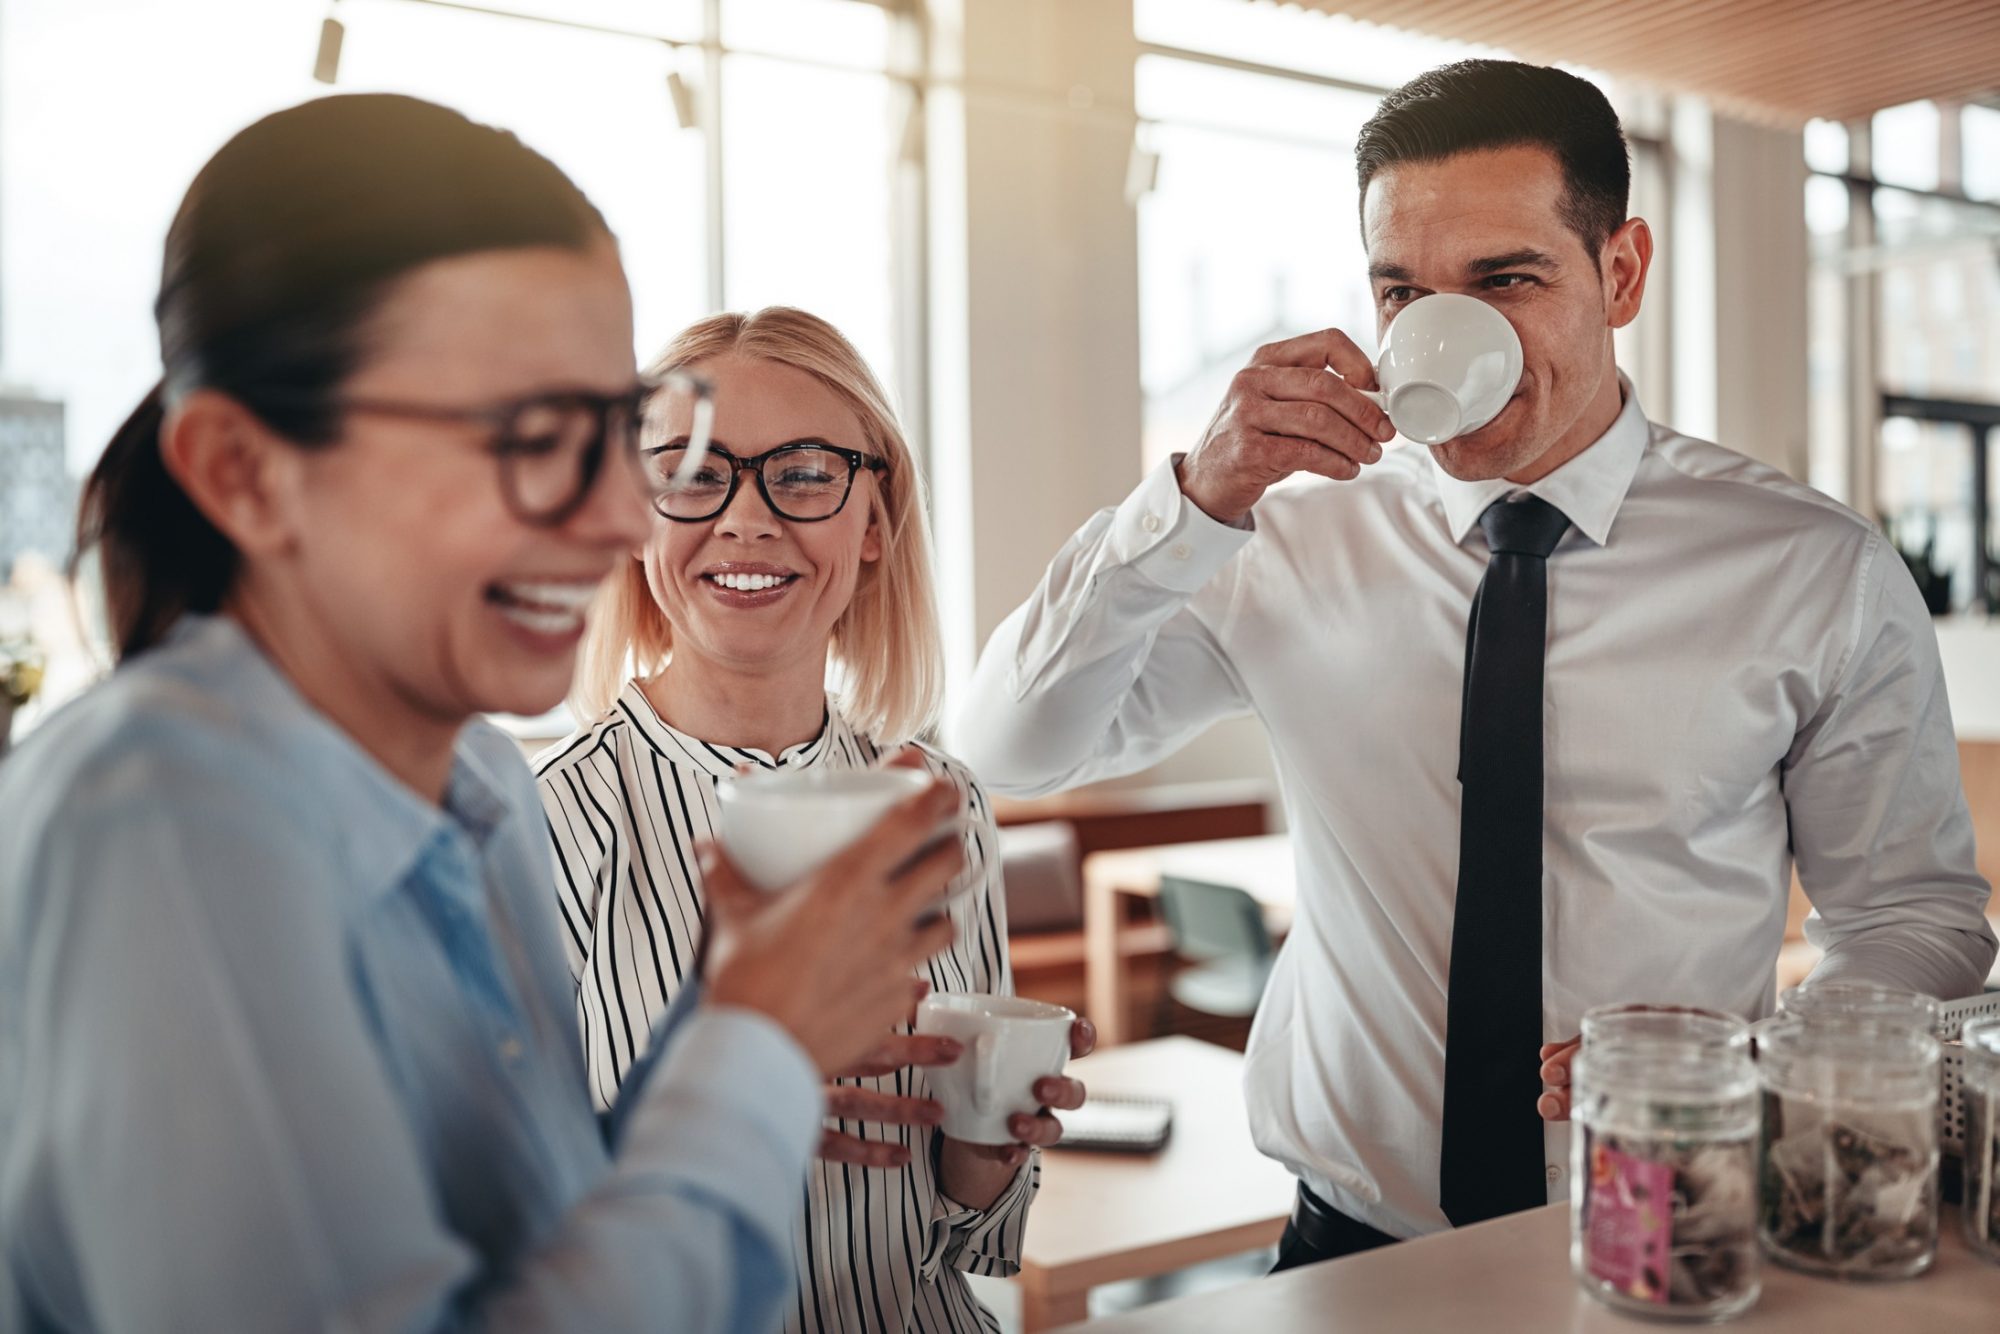 Minneapolis and St. Paul Office Coffee Services | Workplace Culture | Employee Benefit